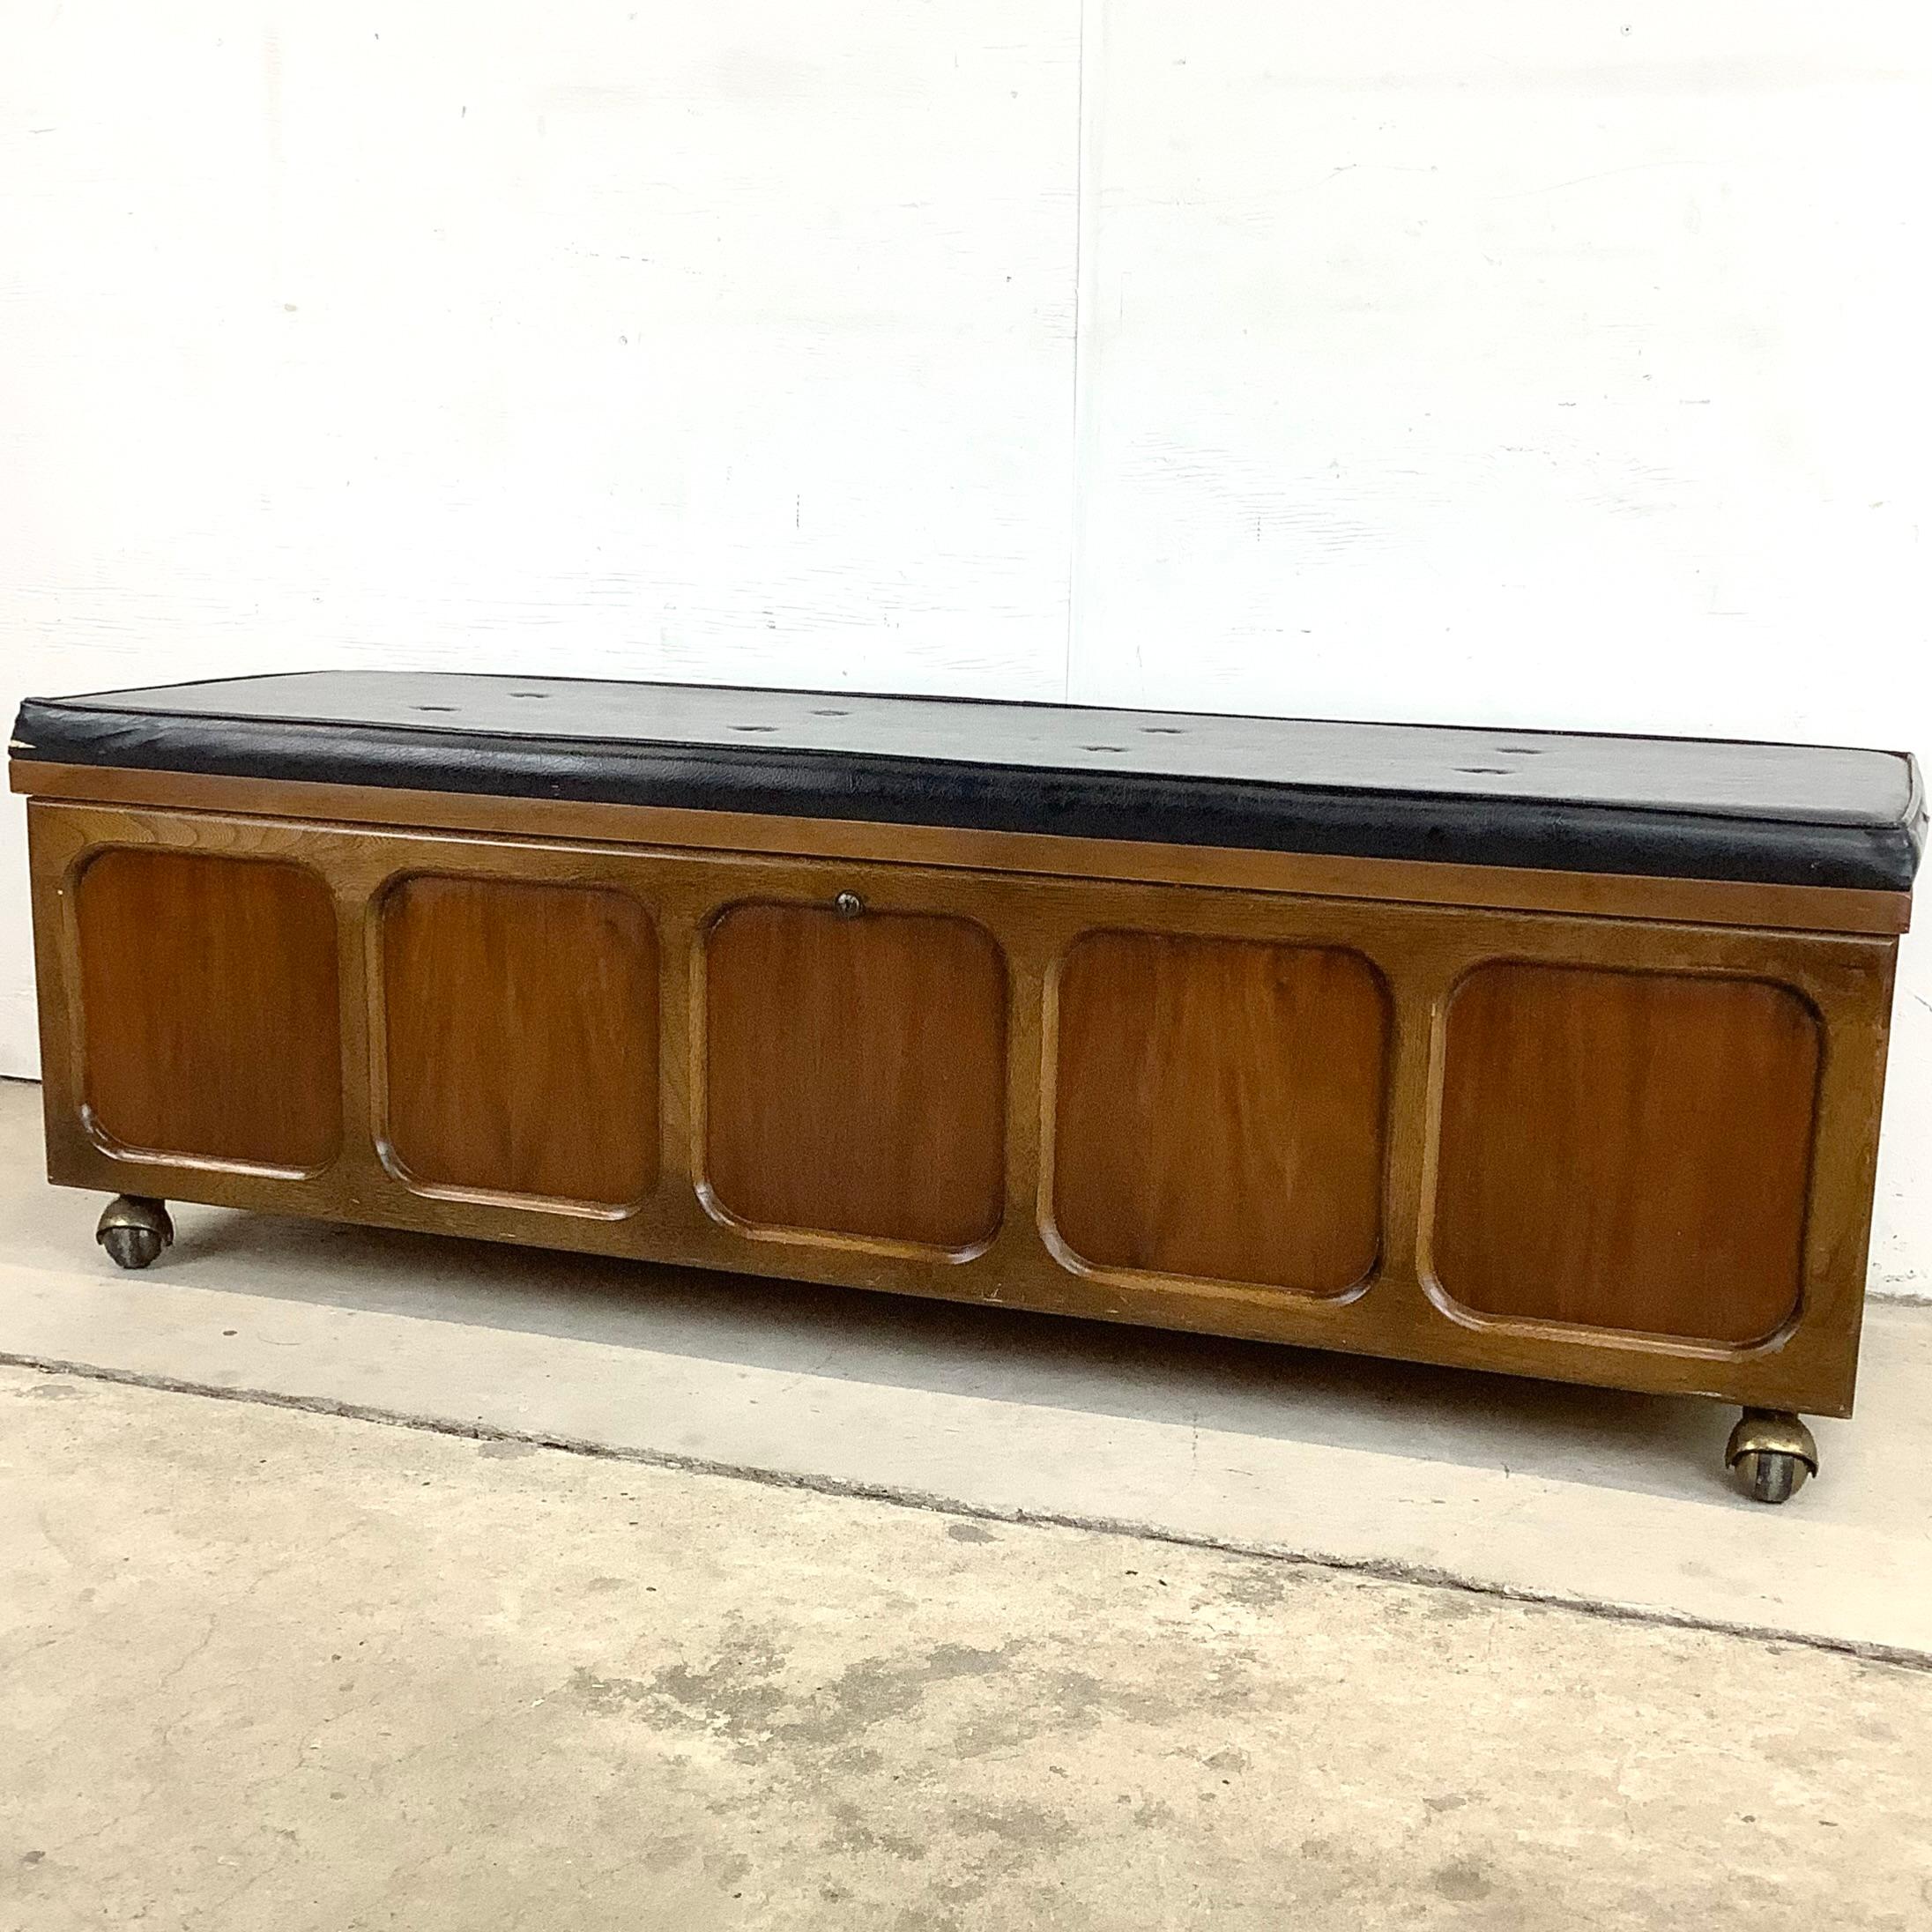 Introducing the Mid-Century Modern Lane Furniture Cedar Blanket Chest Bench on Wheels, a stylish and functional piece that combines mid-century charm, practicality, and mobility to add both storage and seating to your space.

Crafted by Lane